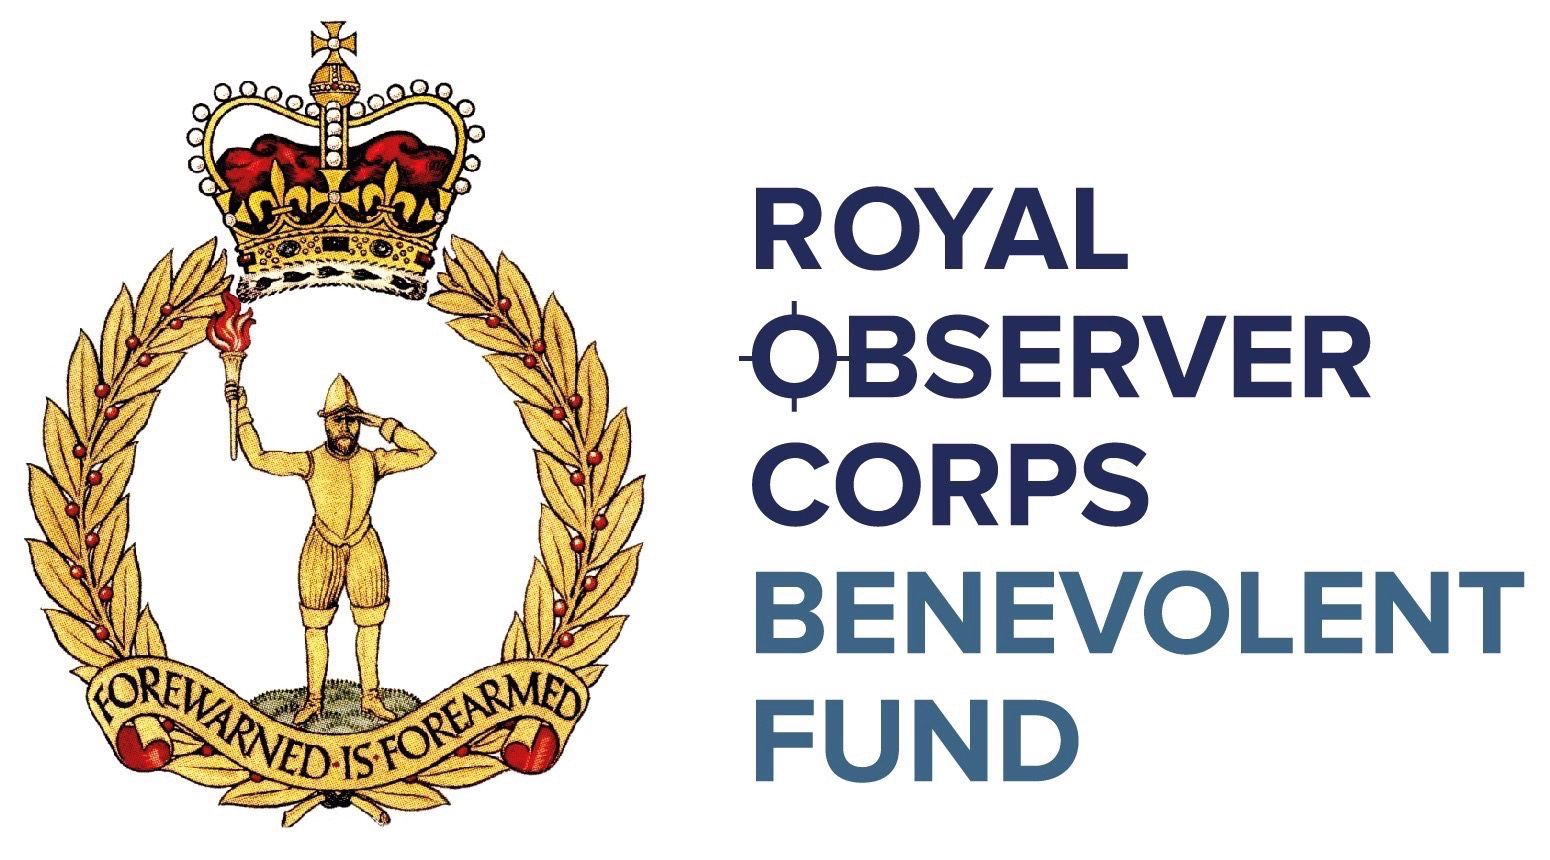 The Royal Observer Corps Benevolent Fund